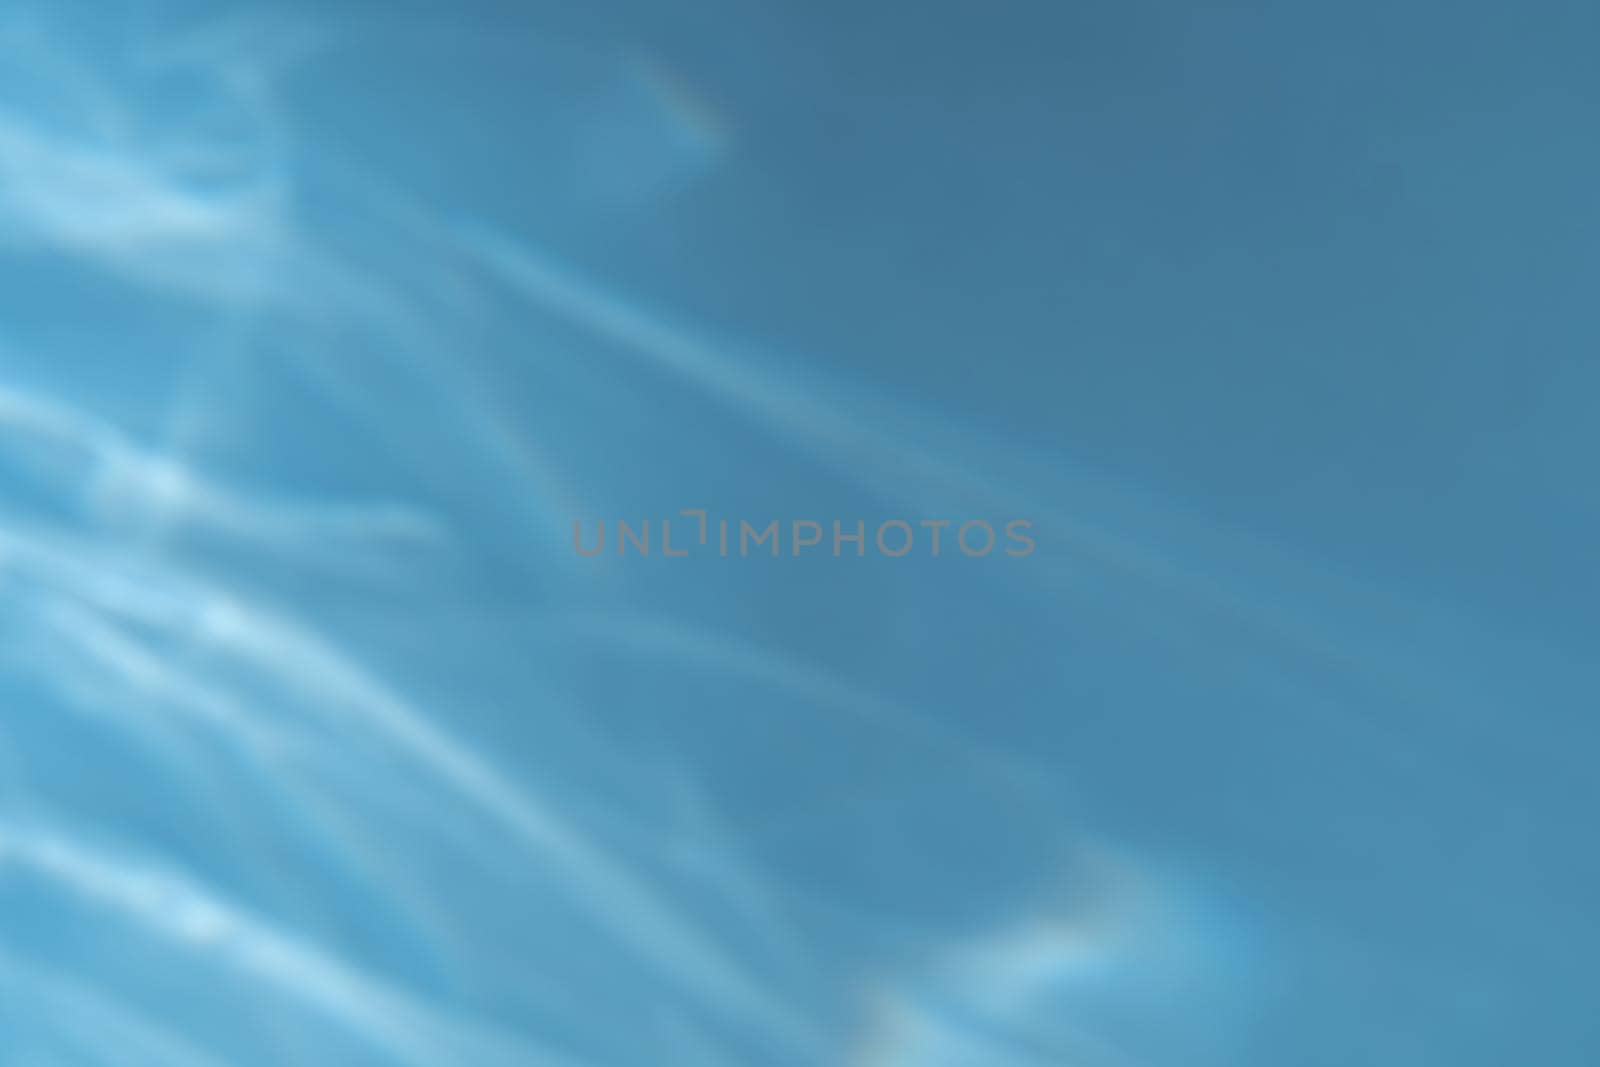 Caustic effect light refraction on blue wall overlay photo mockup, blurred sun rays refracting through glass prism with shadow. Abstract natural light refraction silhouette on water surface mock up.